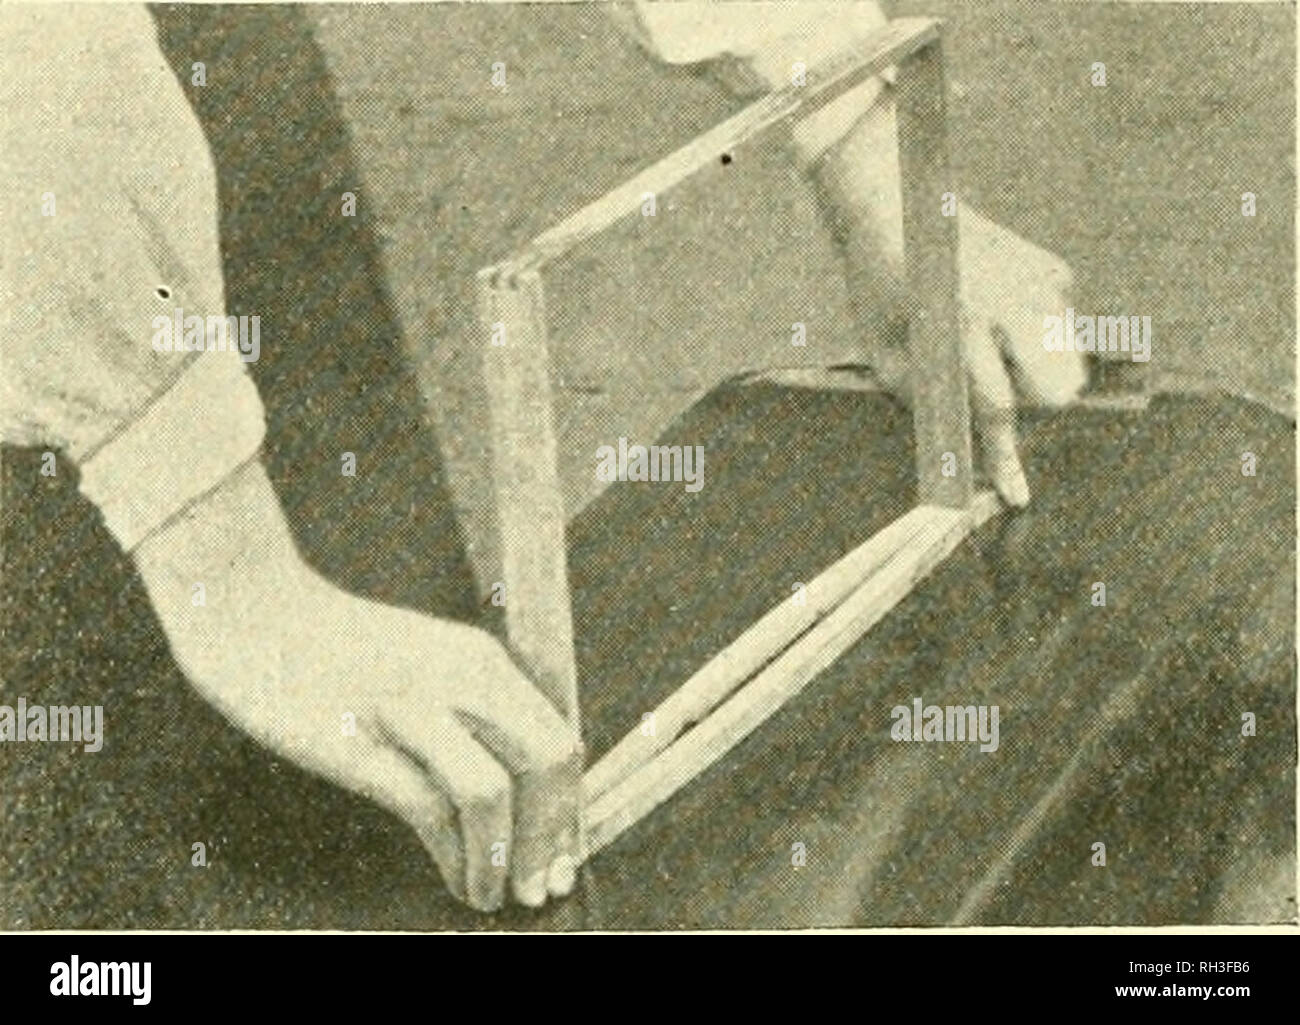 . British bee journal &amp; bee-keepers adviser. Bees. FIG. 23. into the saw cut by placing the fi-ame as shown at Fig. 24; by pulling with the left hand and pushing with the right the saw cut is opened, the foundation is held between the finger and thumb of each hand and slipped down into position while the frame is held with the groove open (Fig. 25). Another method is to drive a couple of nails into the bench about fin. apart; these are inserted into the saw cut and the frame turned right round so that the cut is held open automatically. Refer- ence to Fig. 26 will show the nails and the po Stock Photo